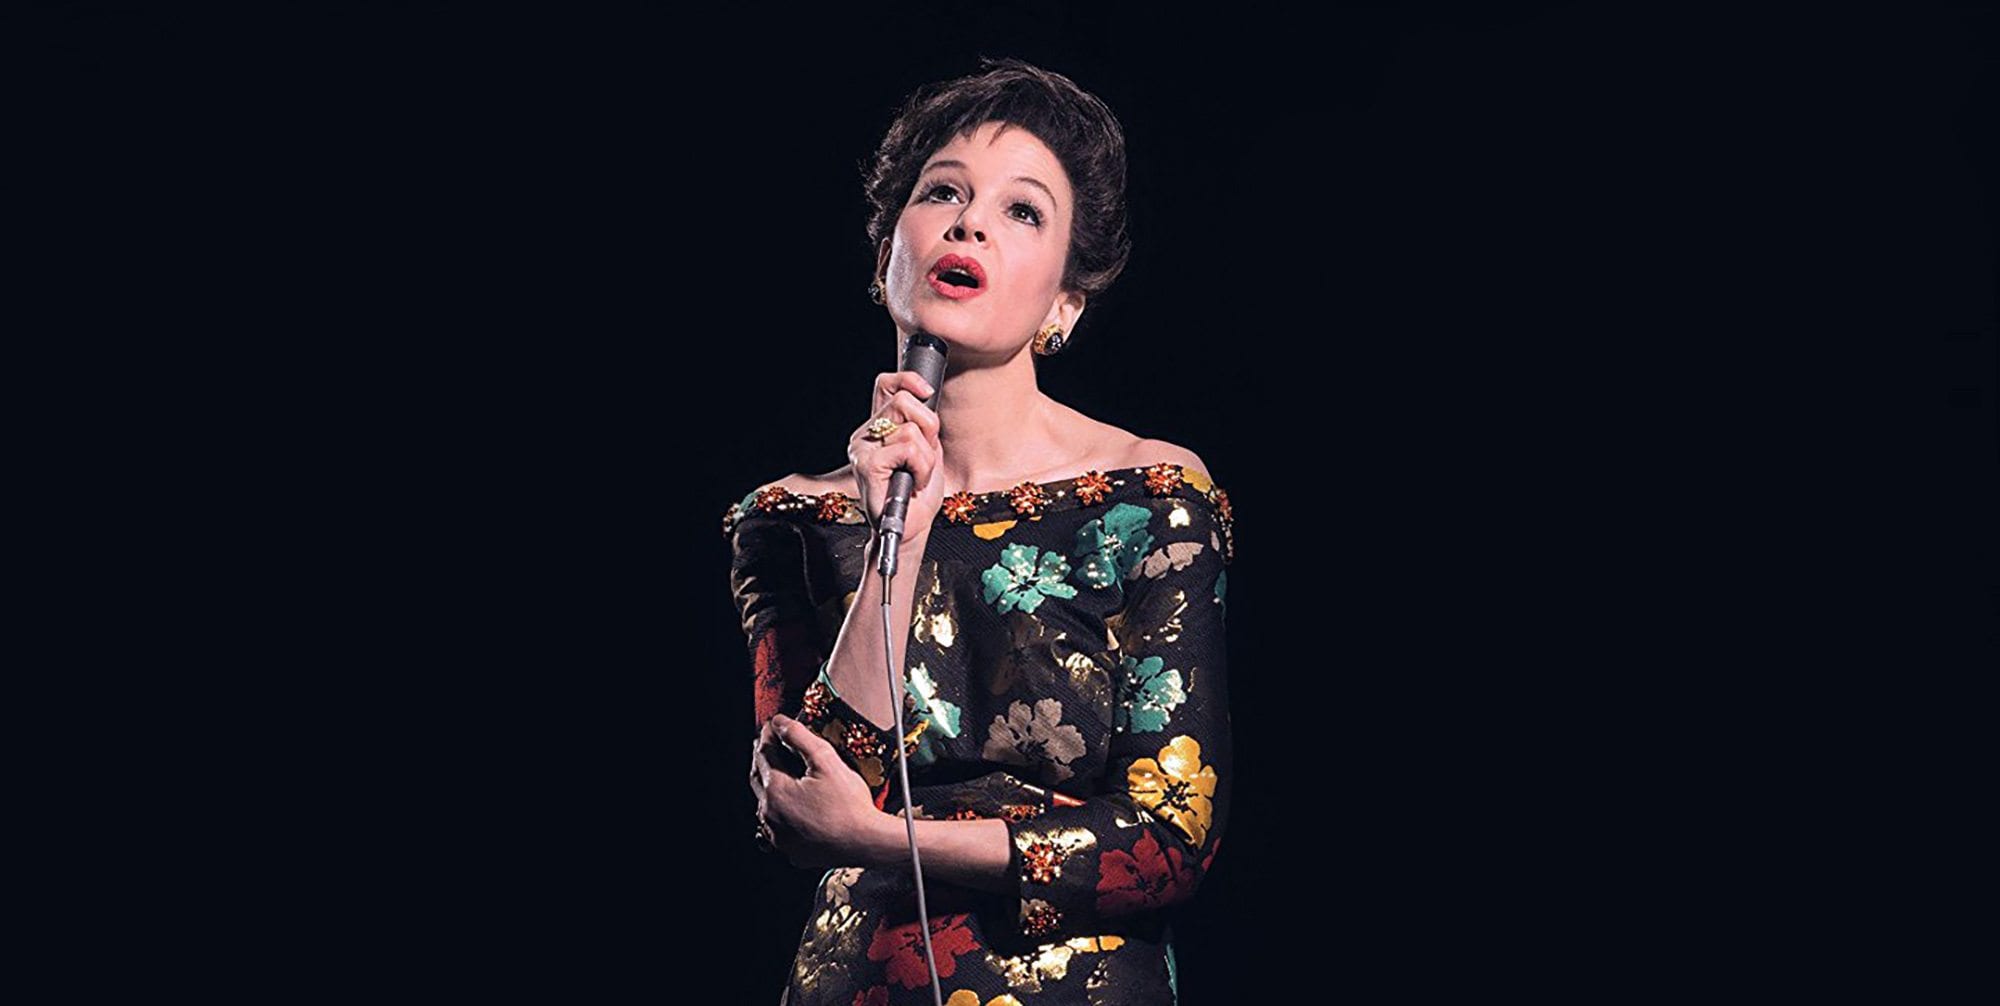 While you’re waiting for Renée Zellweger's turn as Judy Garland in 'Judy', here some of the best biopics about musicians to watch in the interim.